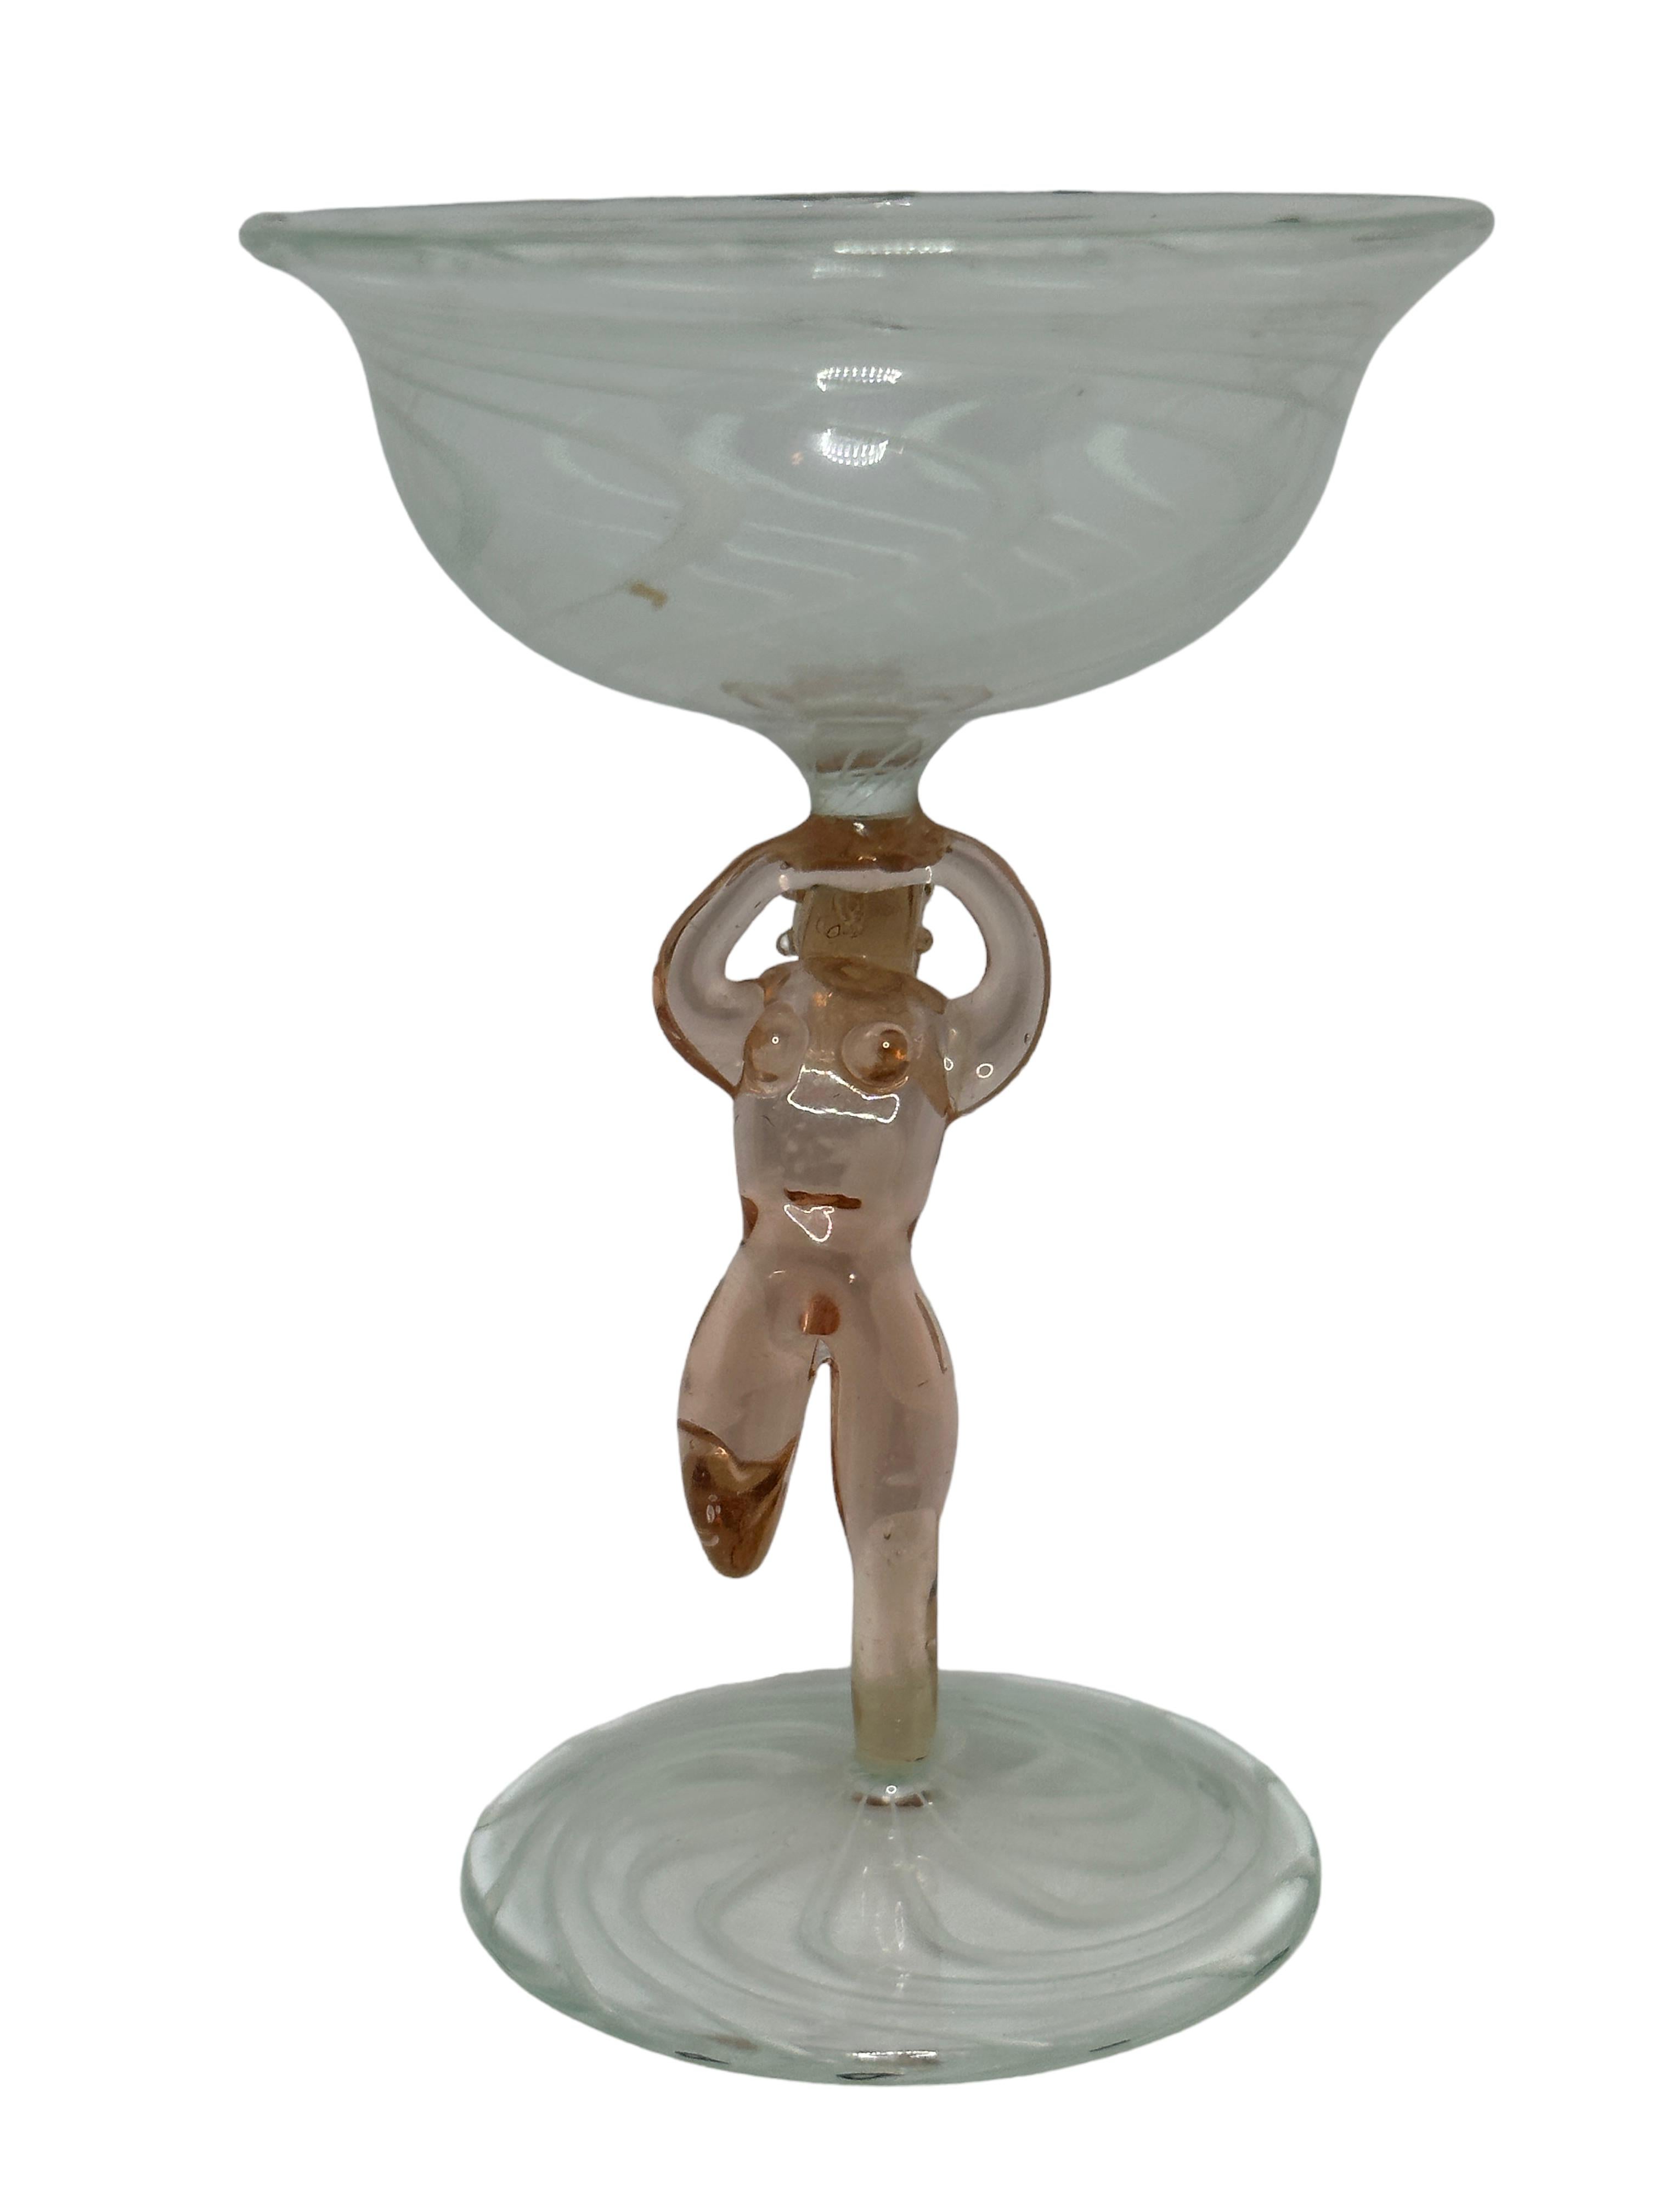 This is a beautiful single vintage stemmed cocktail glass from Austria. It features a bare women's shaft and is bimini art style. The clear glass has a wonderful swirl design, the stem depicts a nude lady in pink colour. The base is a beautiful